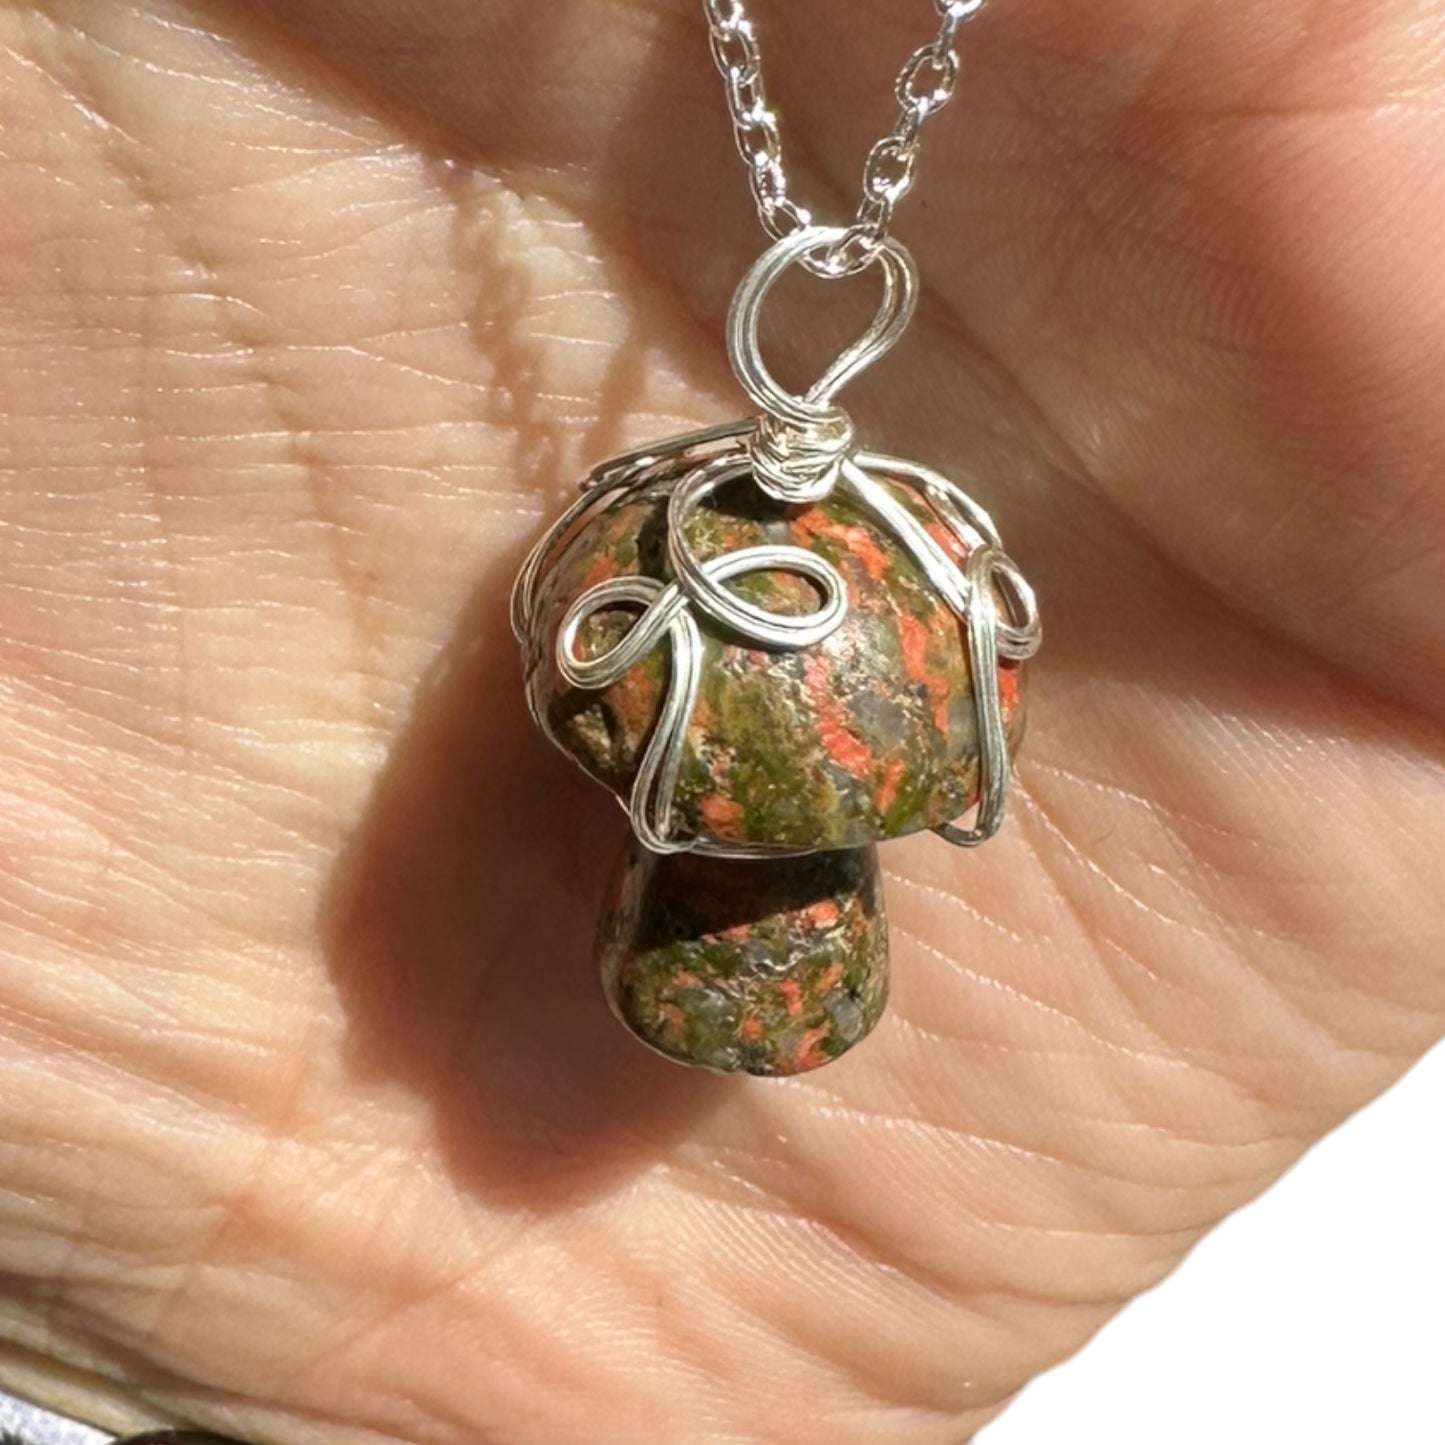 Sterling Silver | 14KT Gold Filled Wire Wrapped Unakite Crystal Mushroom Pendant